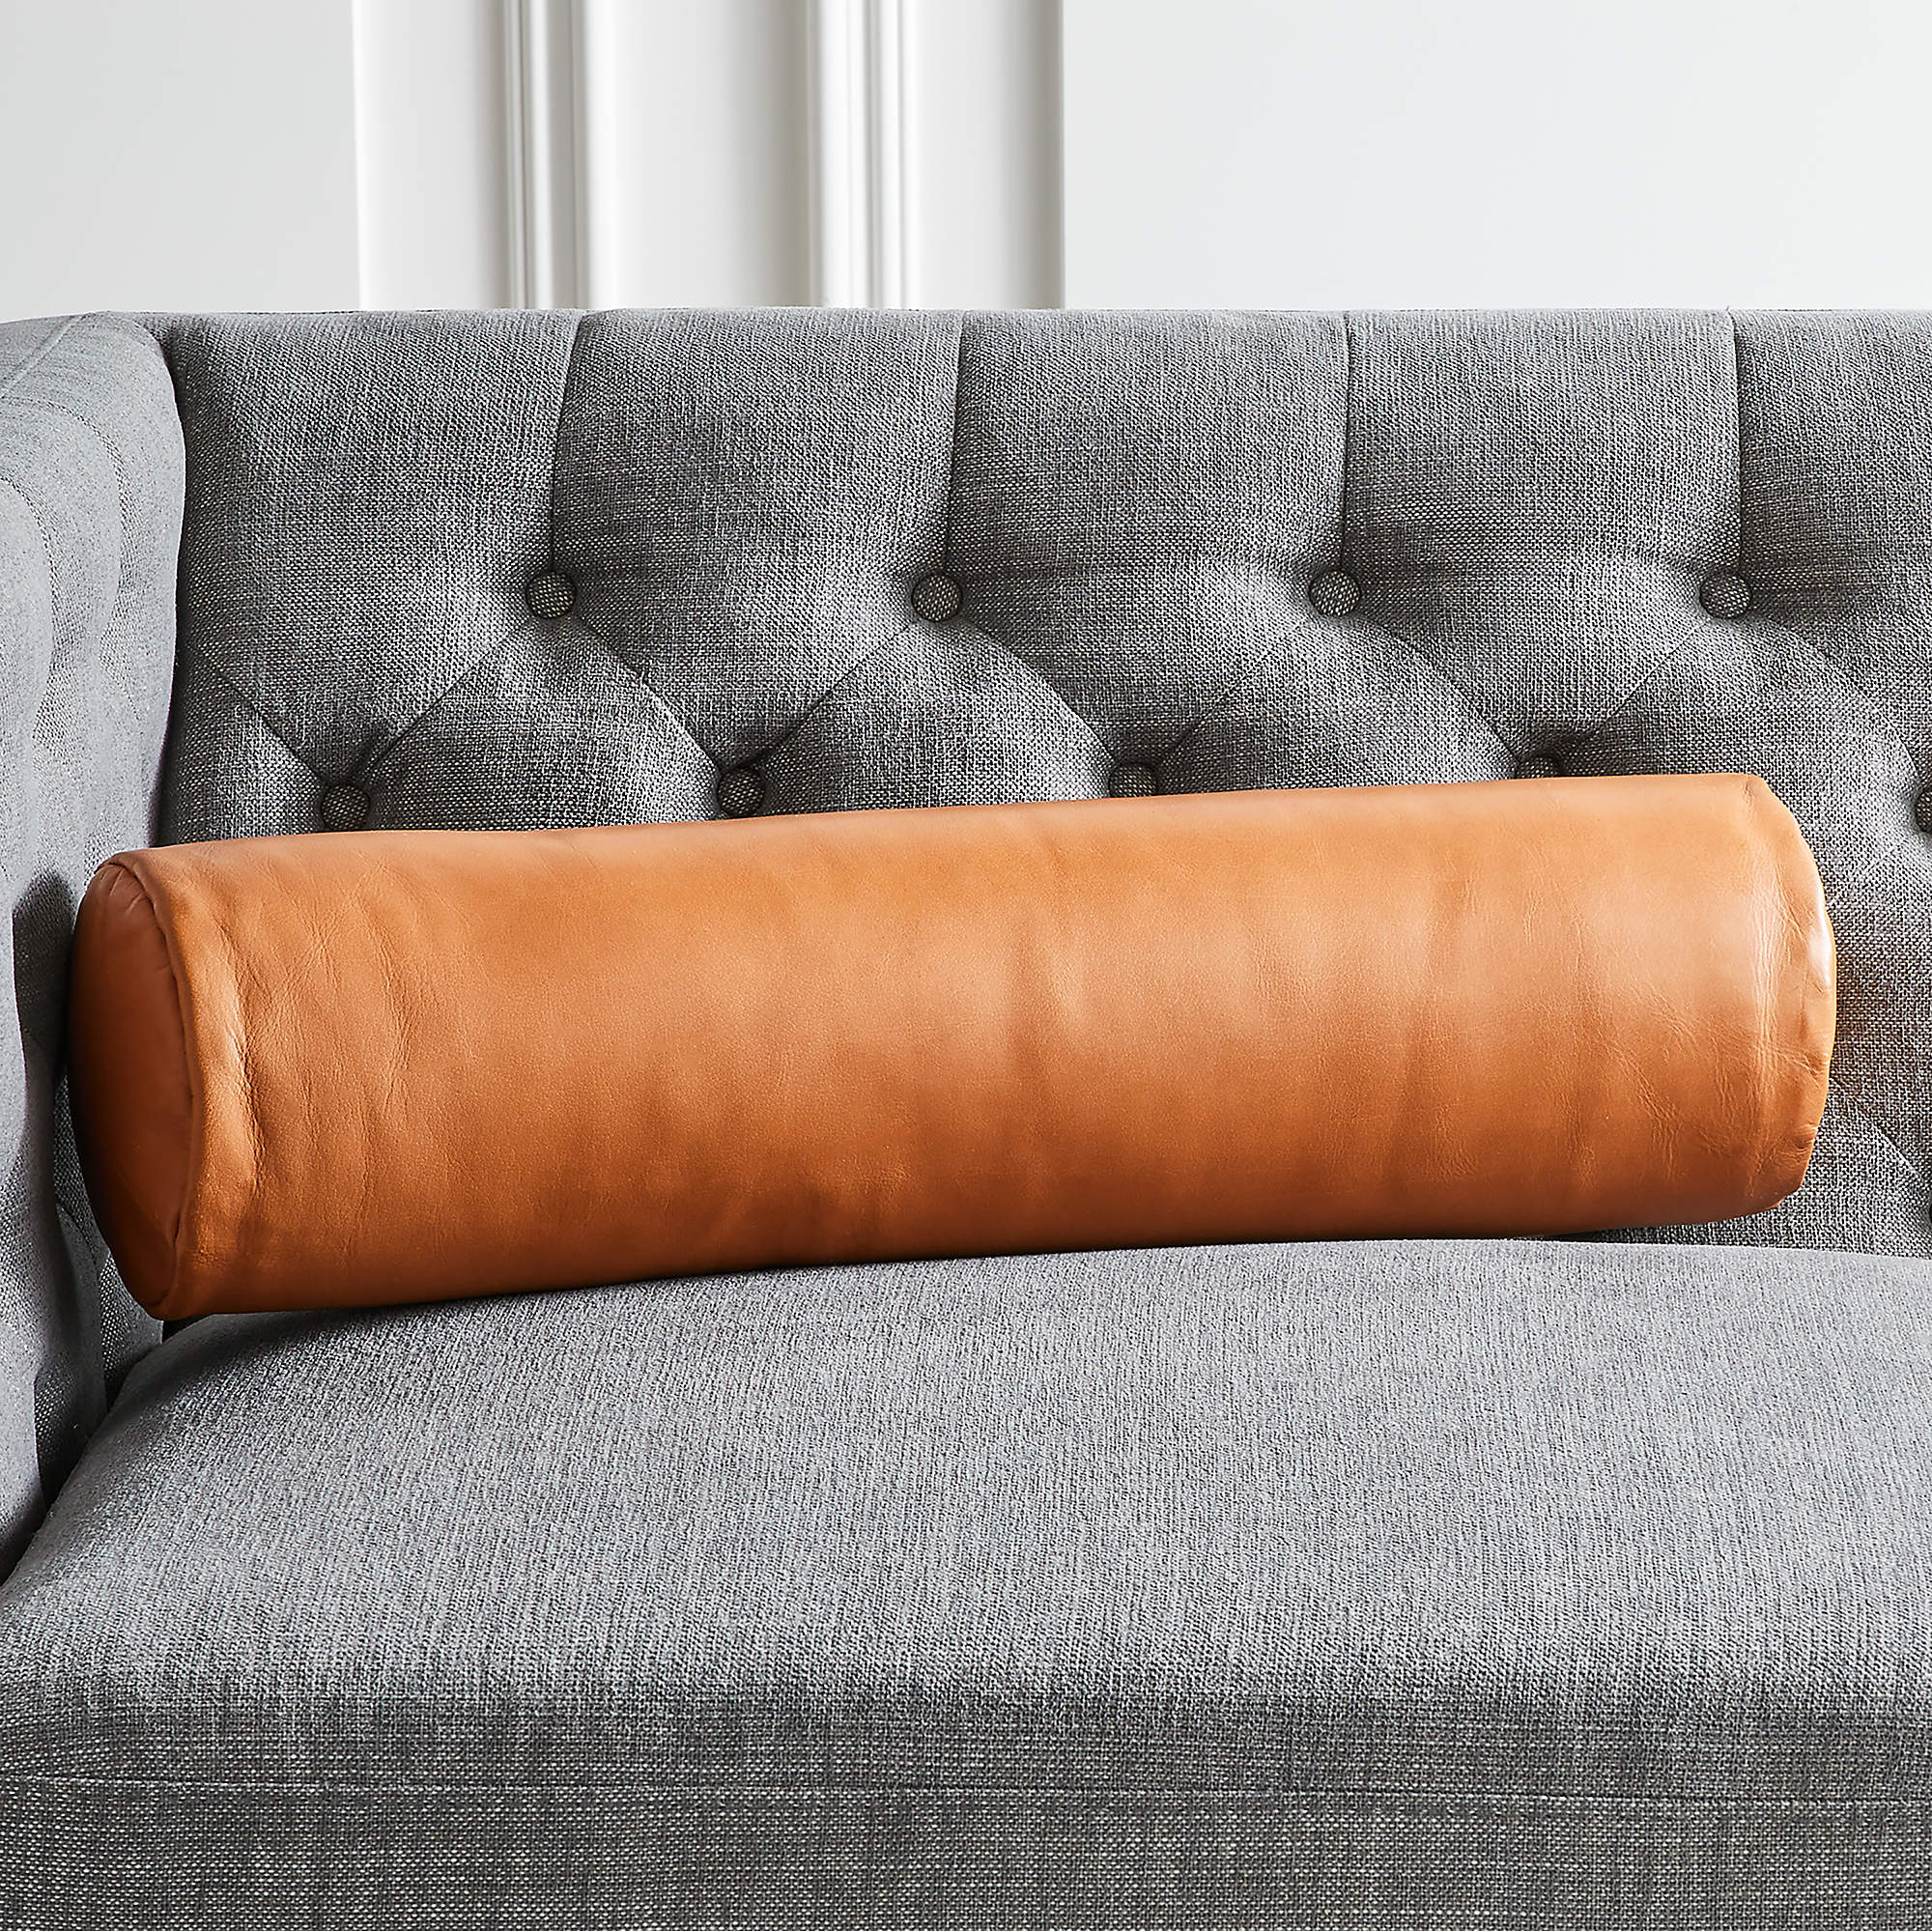 Shop Bolster brown leather pillow from CB2 on Openhaus